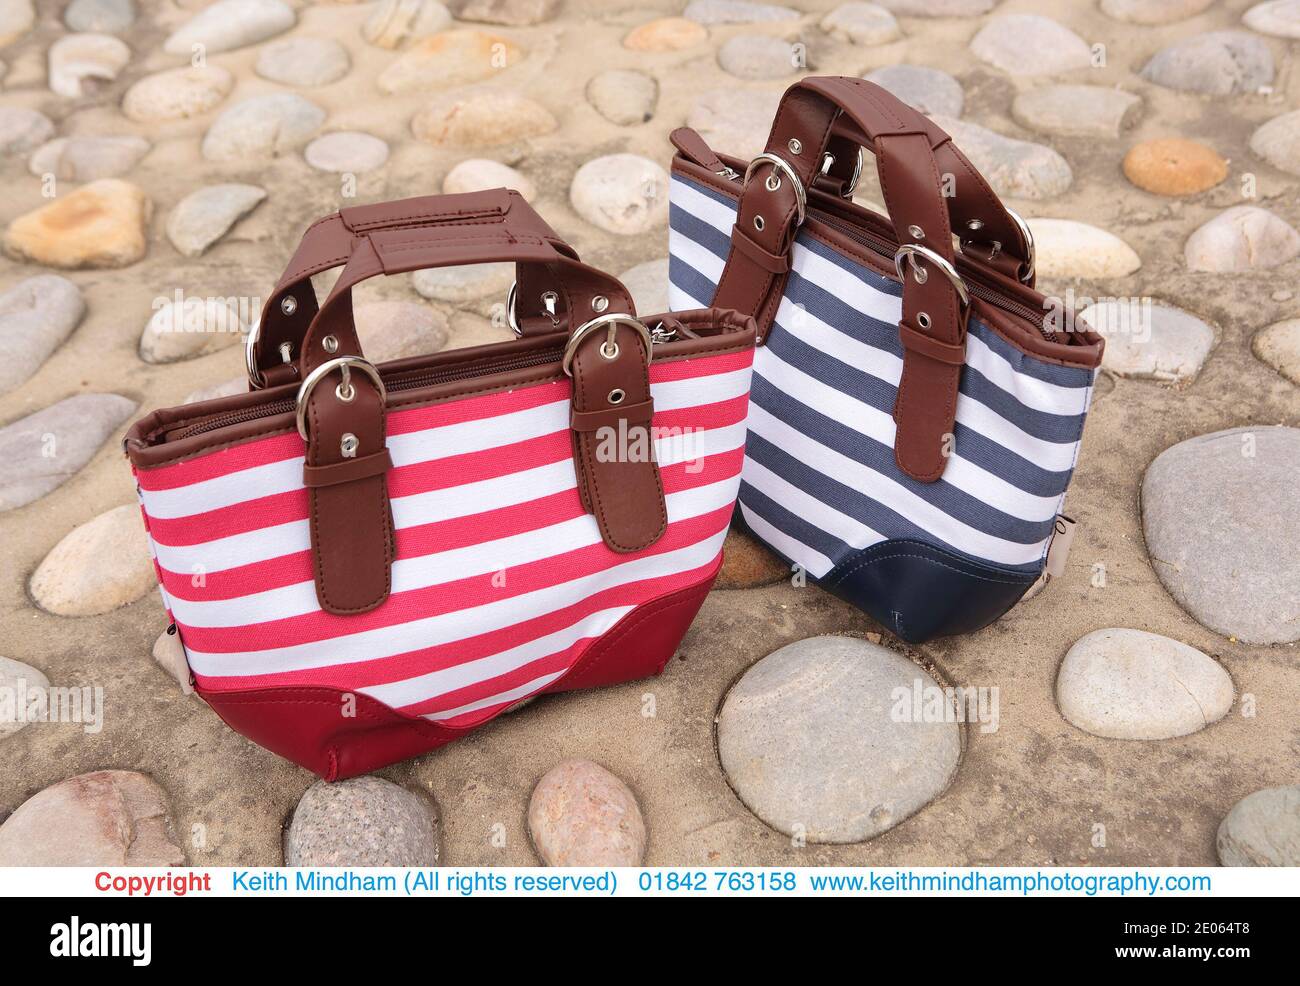 nautical themed red and blue striped ladies handbags on pebble stone path surface Stock Photo